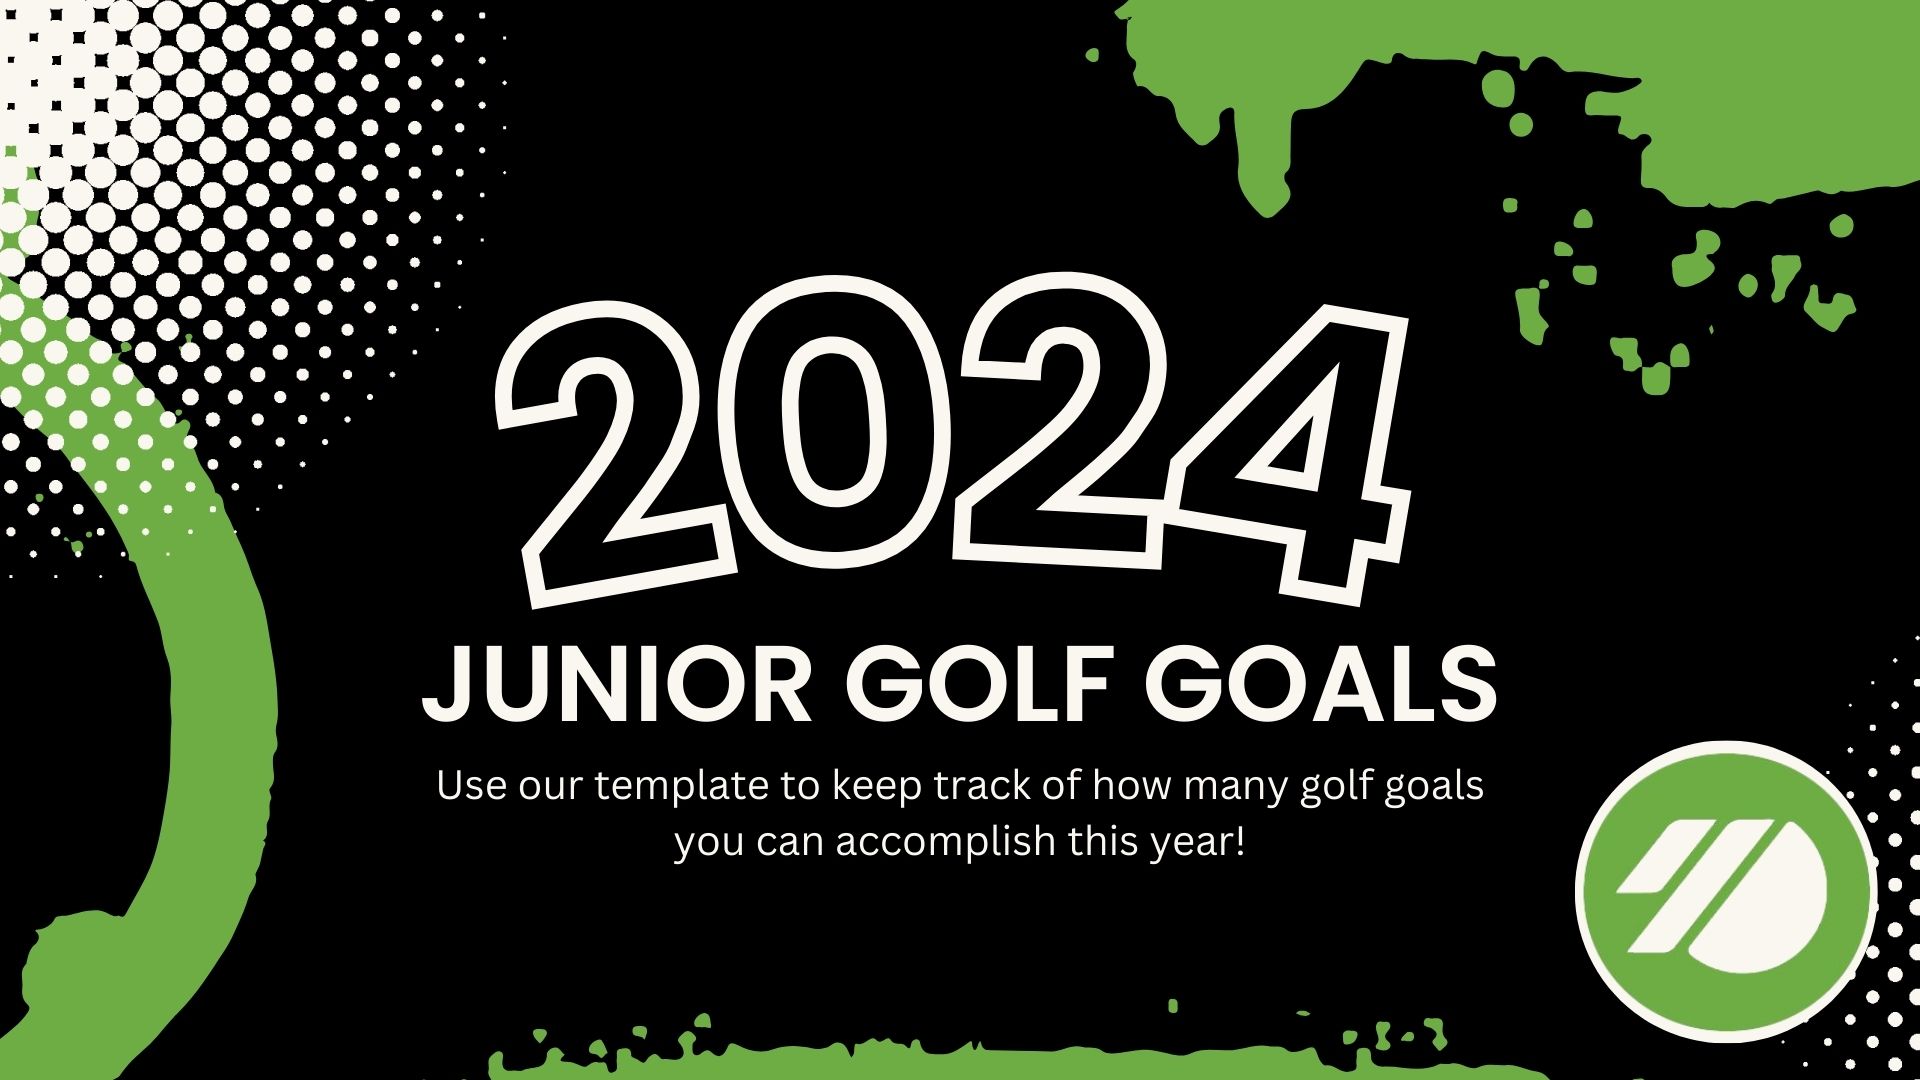 Create Your Own Golf Goals For 2024 